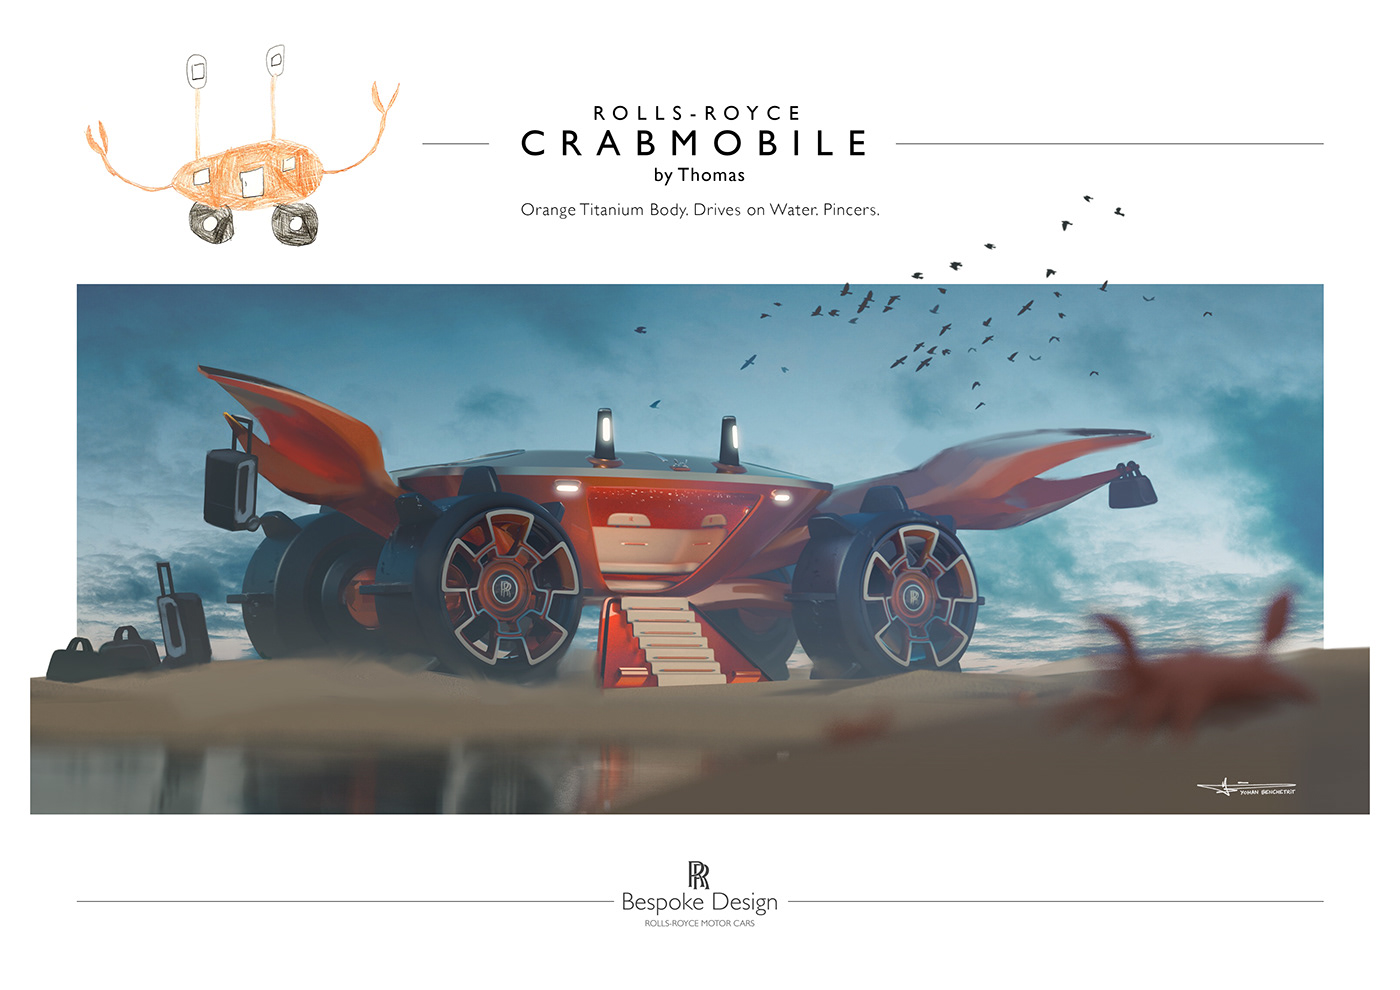 Competition contest crab Crabmobile design Drawing  kid Rolls-Royce